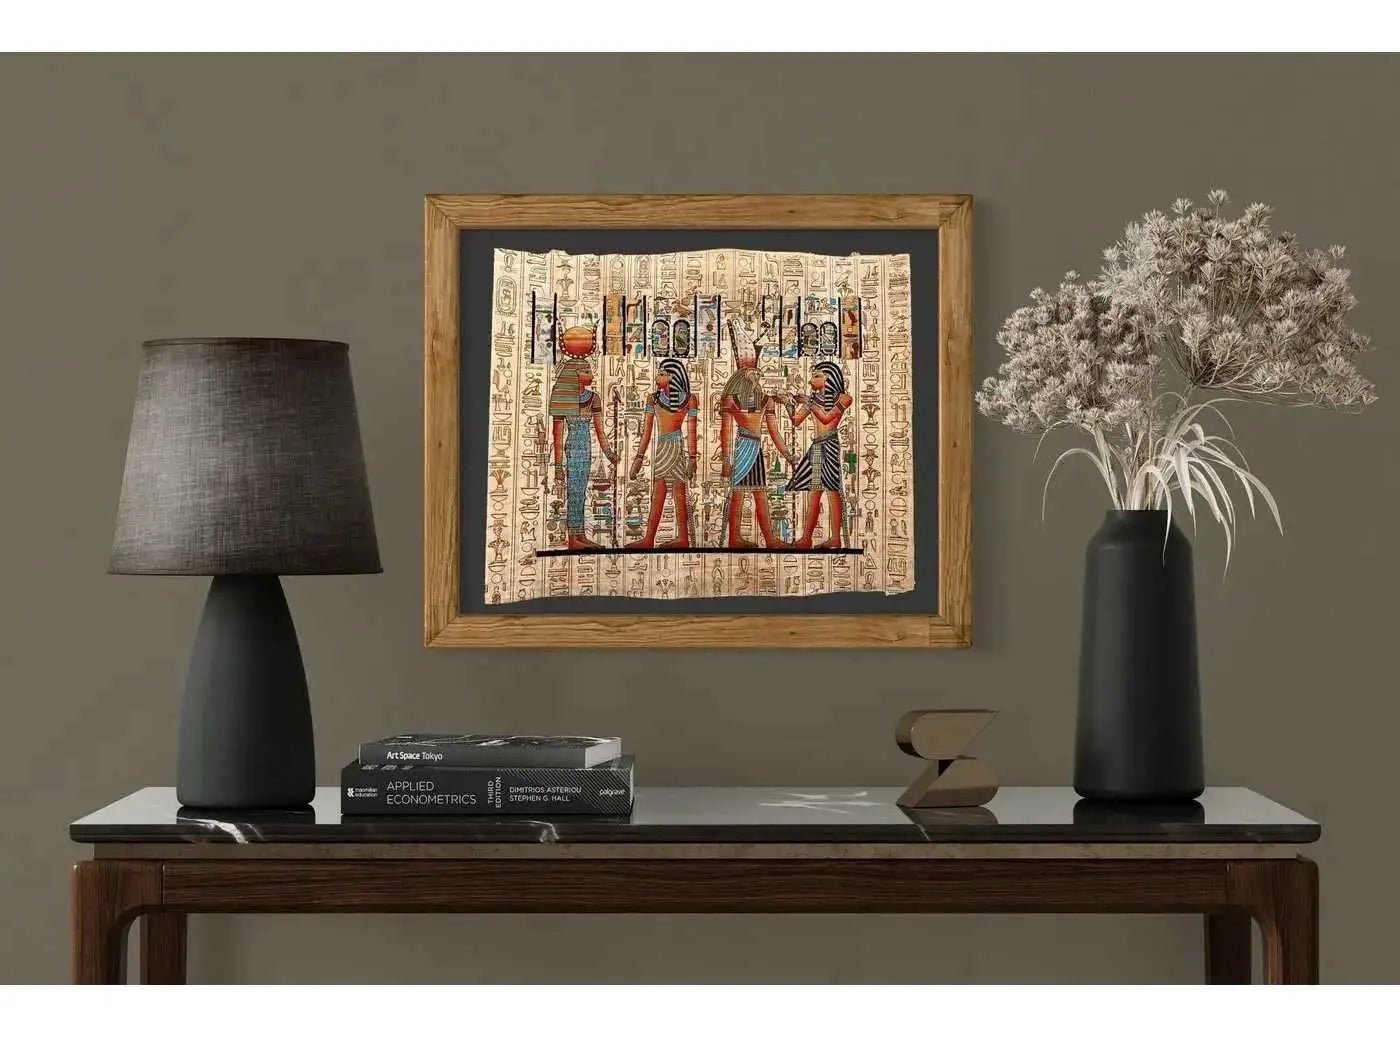 Tutankhamun Offering to Horus - King Tut Before Hathor - Hieroglyphs Papyrus - Ancient Egyptian Wall Art - Gift For Kemetic - 17x13 Inches